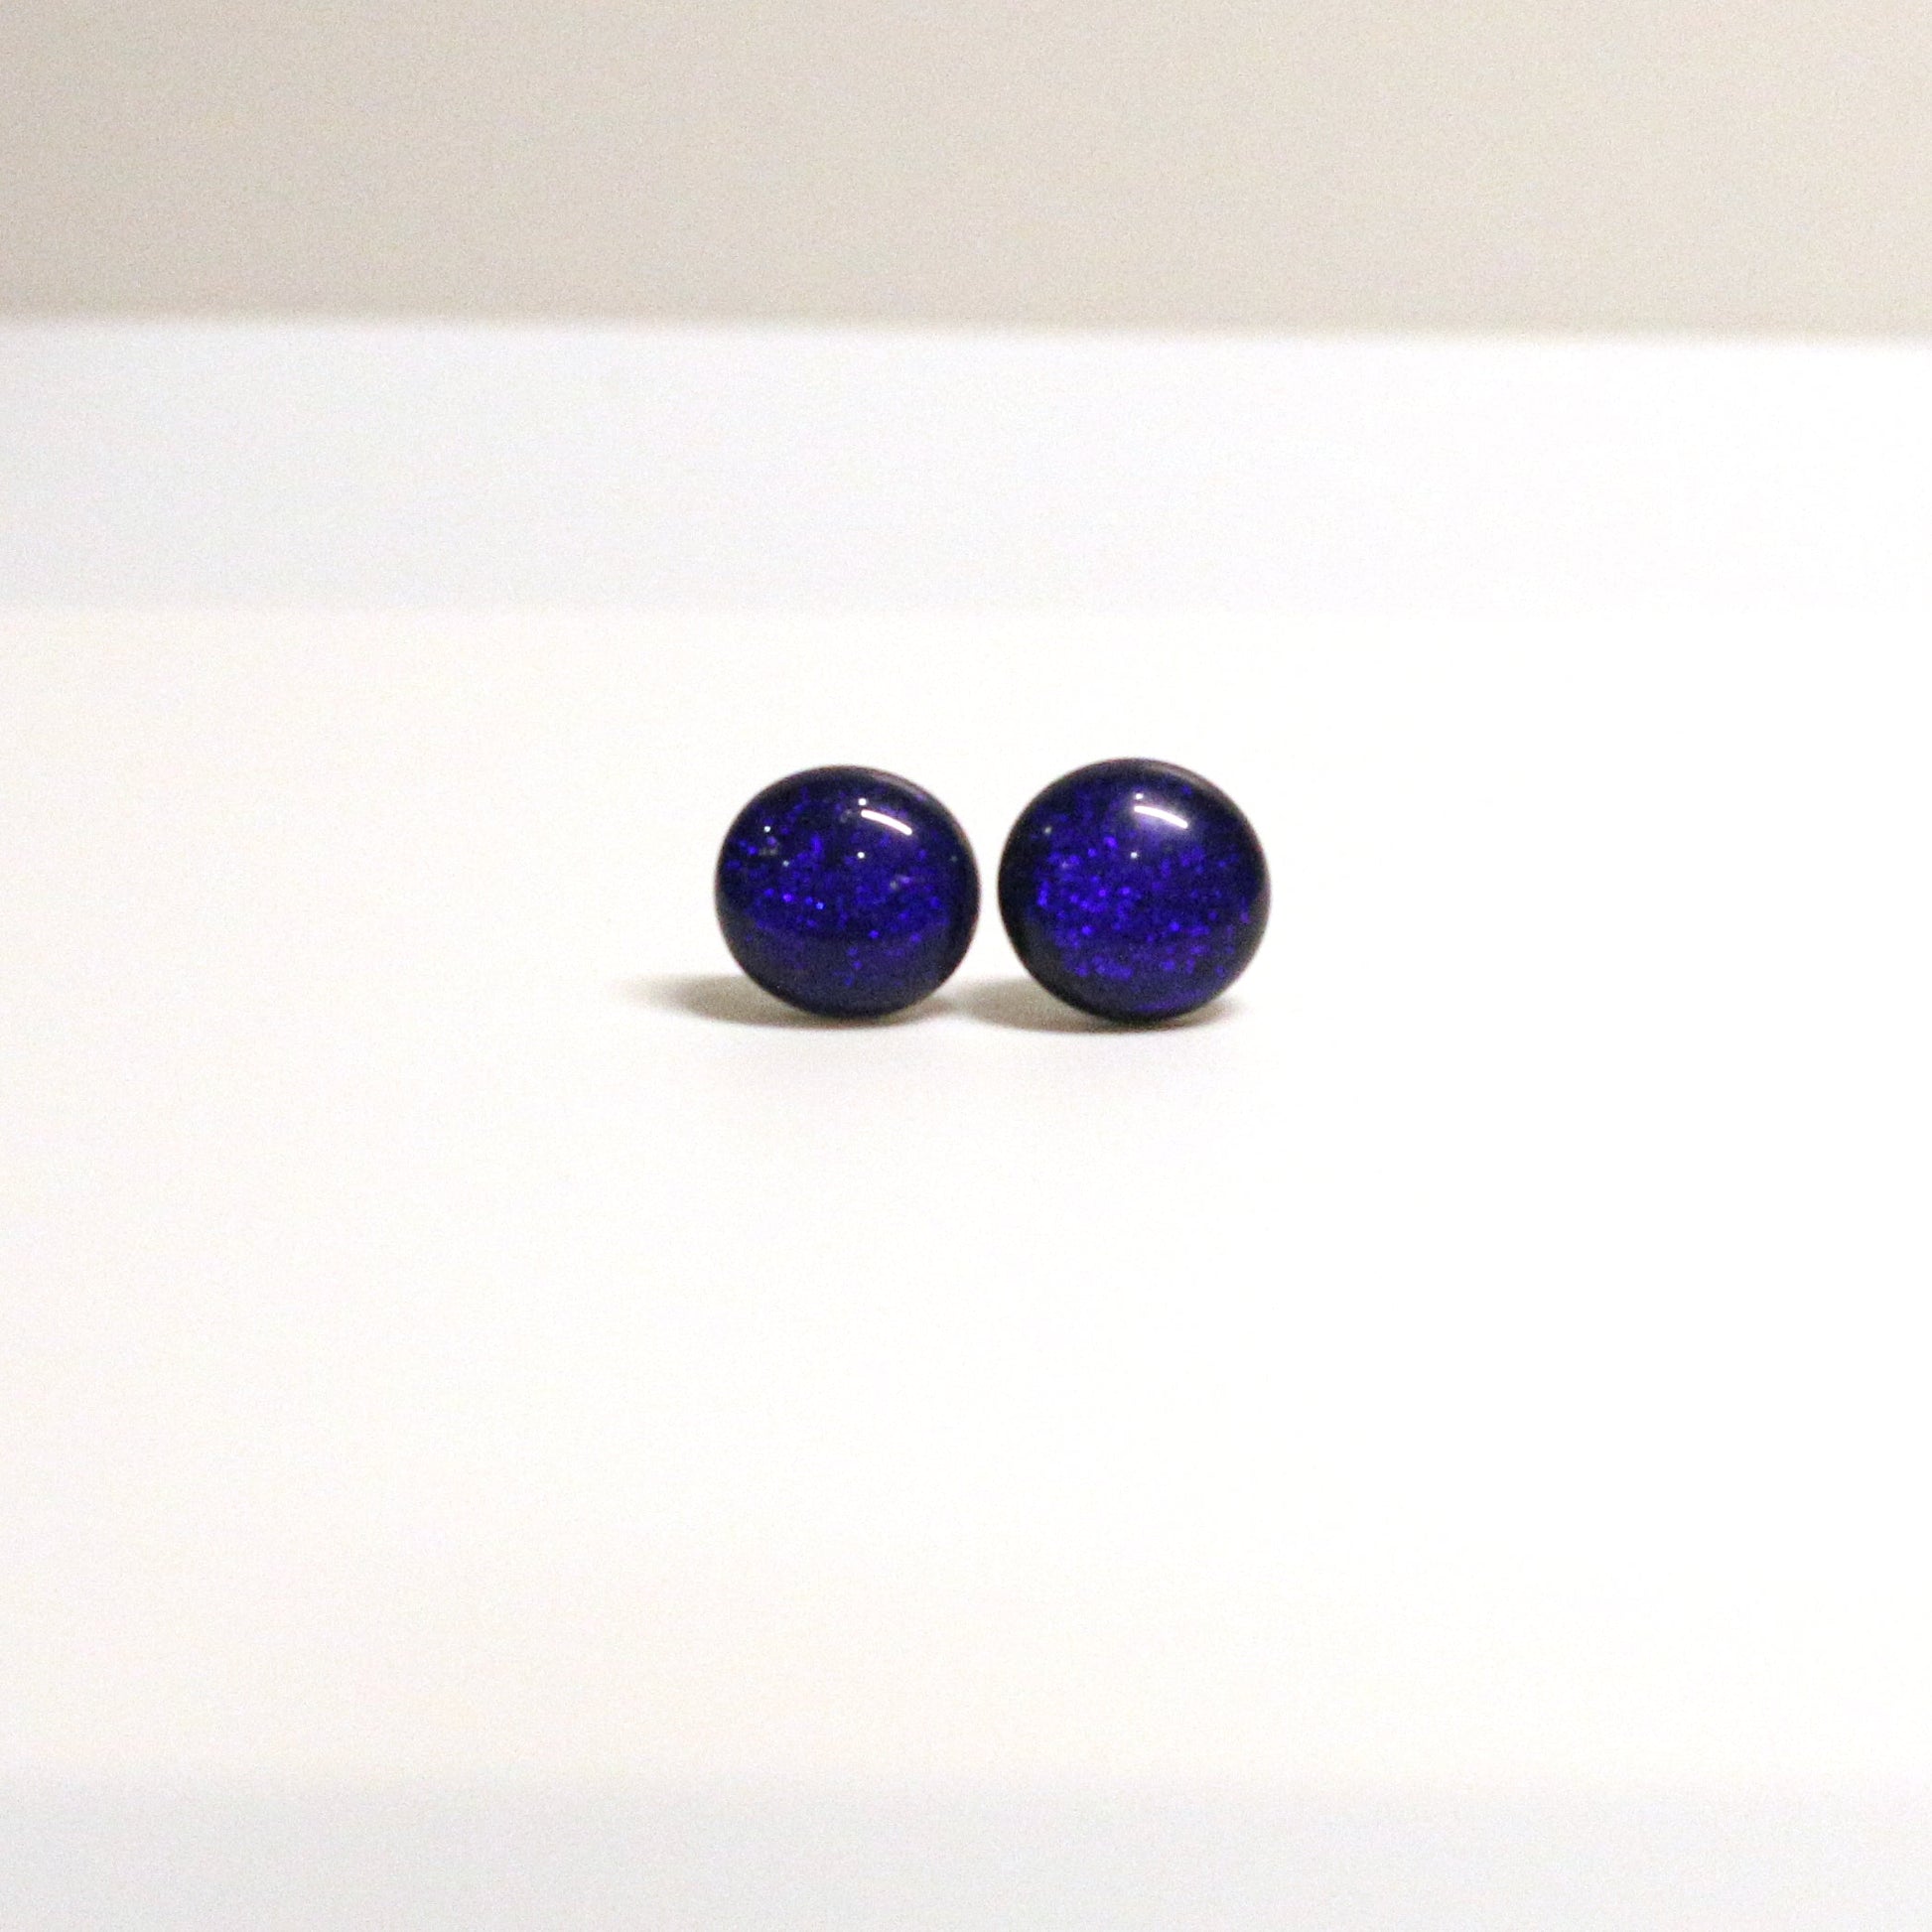 Dichroic Fused Glass Earring Studs - 3831